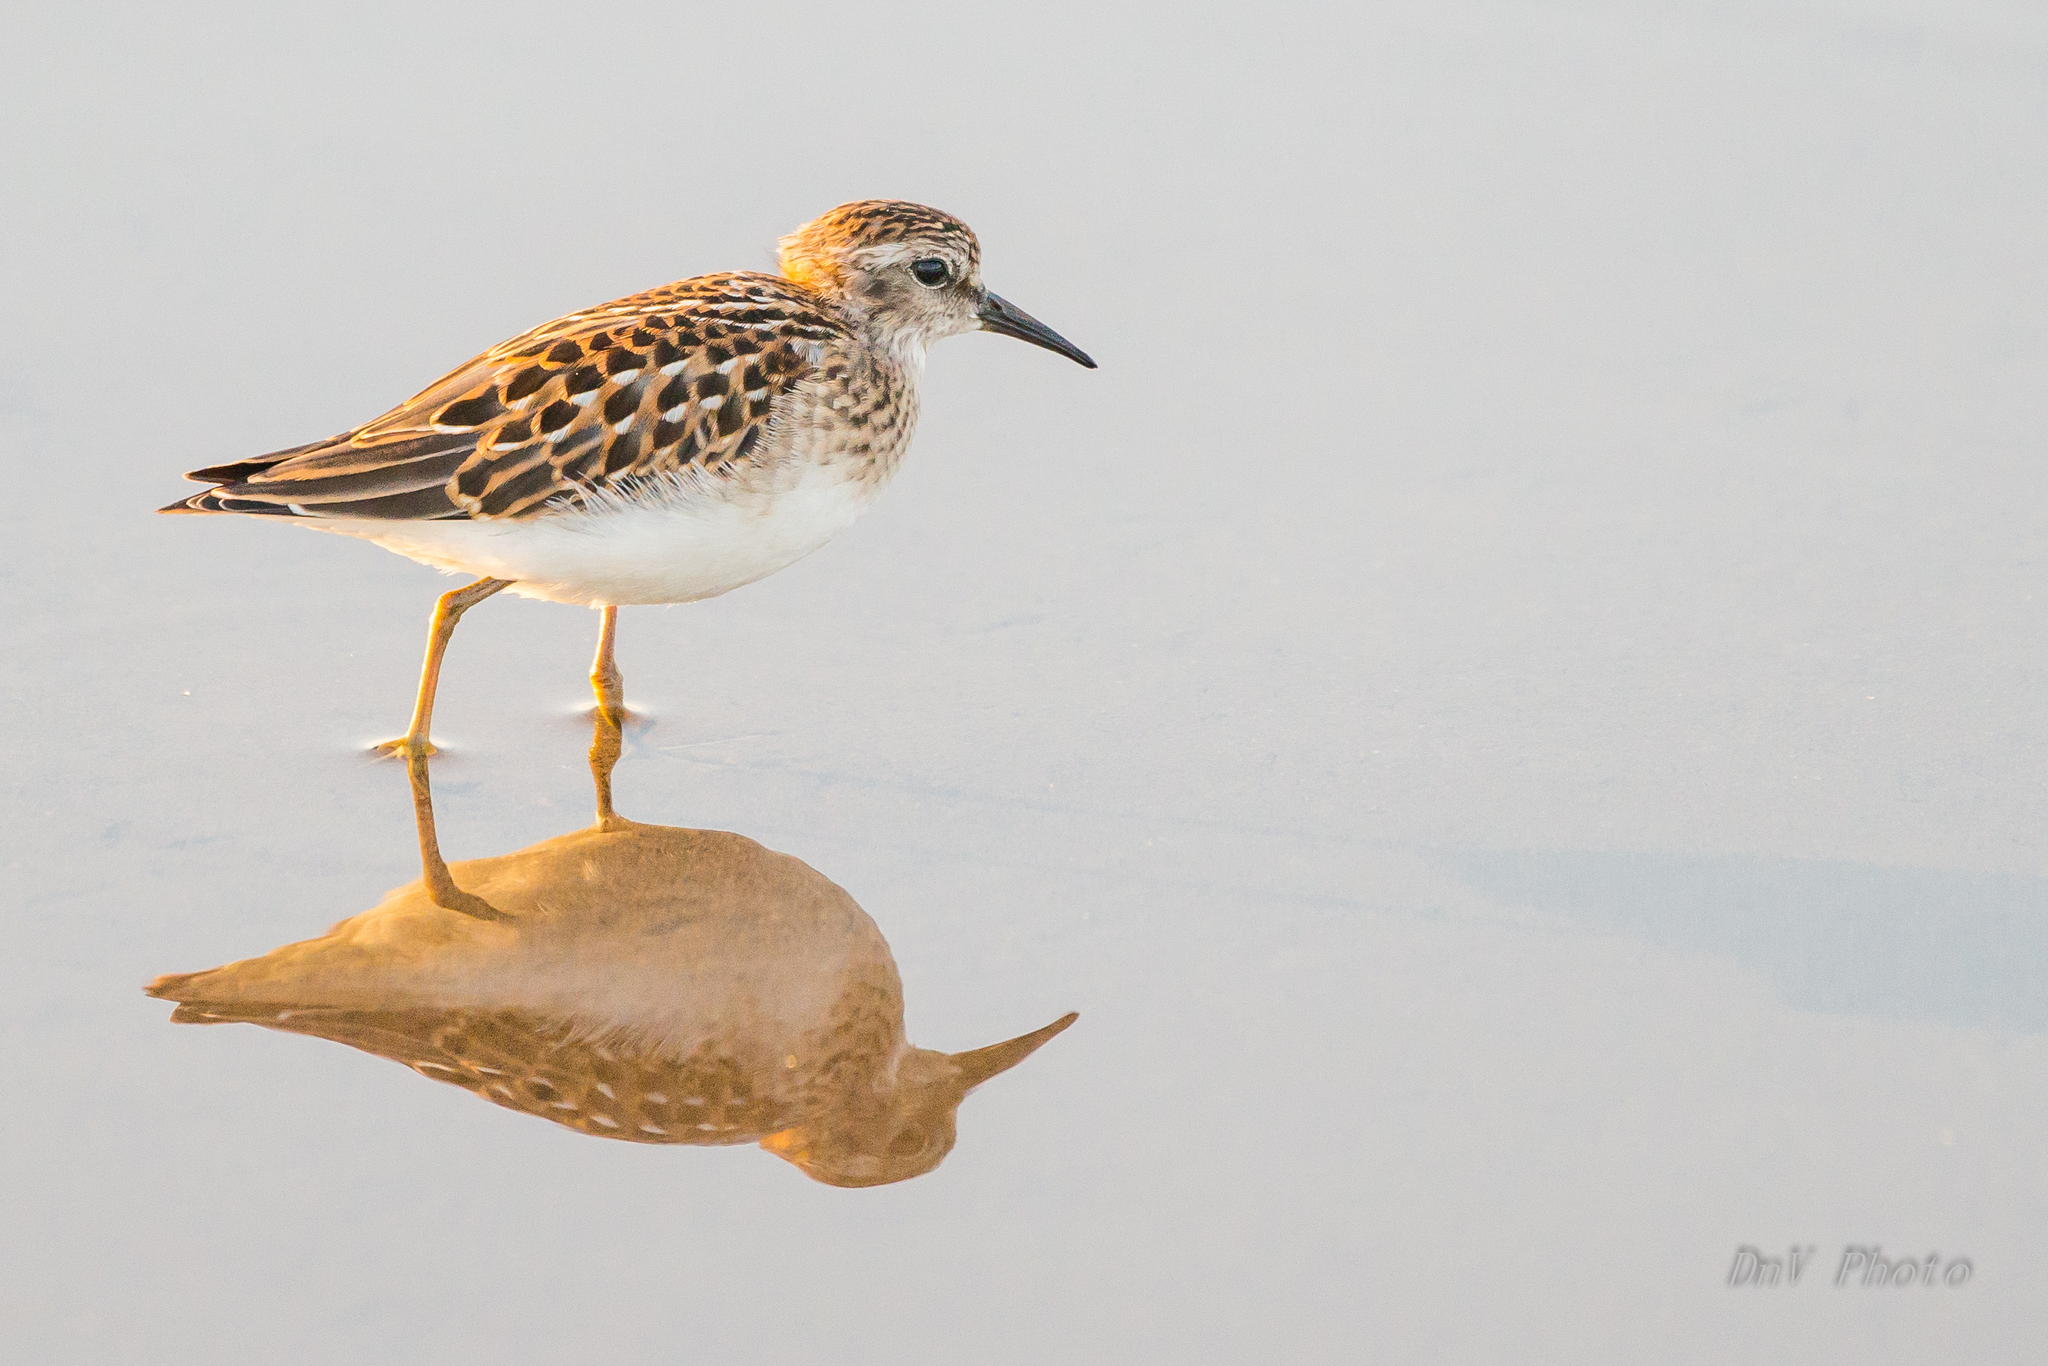 Least Sandpiper by David Ho